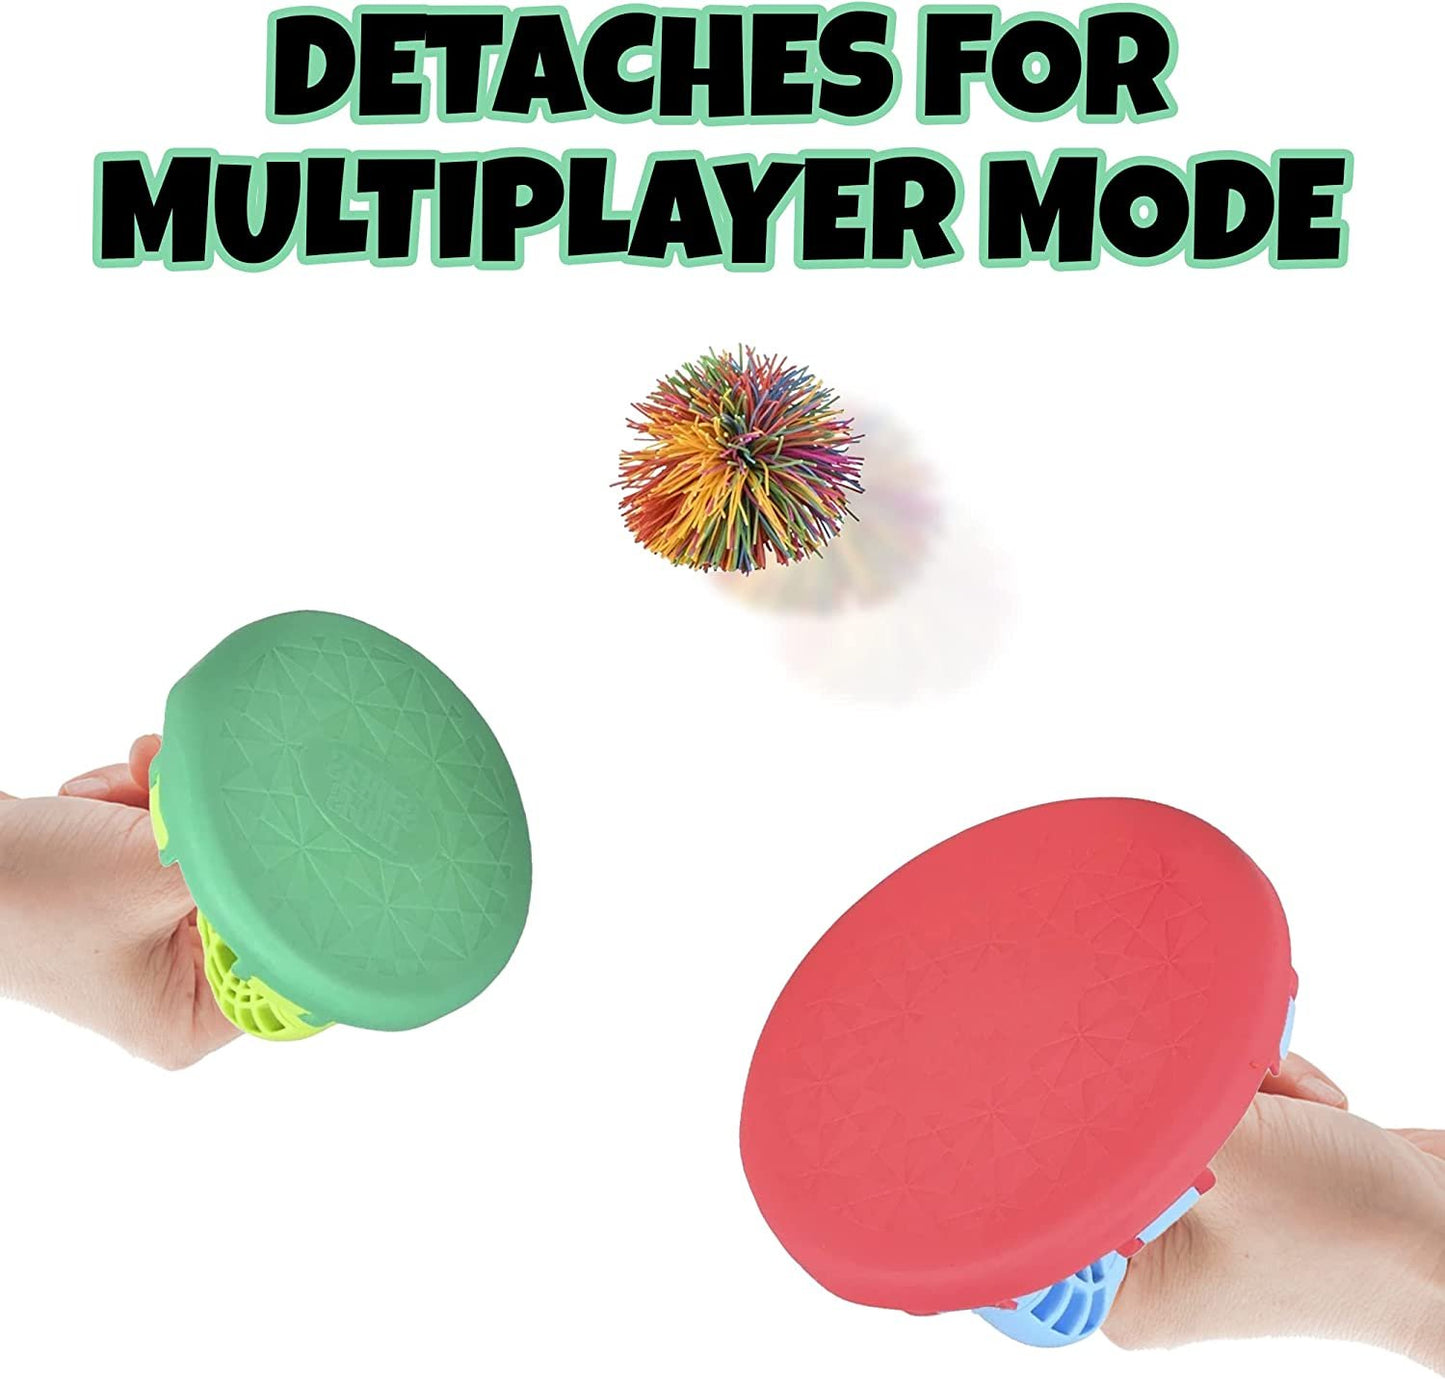 ArtCreativity Paddle Catch Ball Set, 2 Attachable Paddles and 2 String Balls, Paddle Ball Game for Indoor & Outdoor Fun, Toss & Catch Play Balls, Active Hand Eye Coordination Games for Kids and Adults